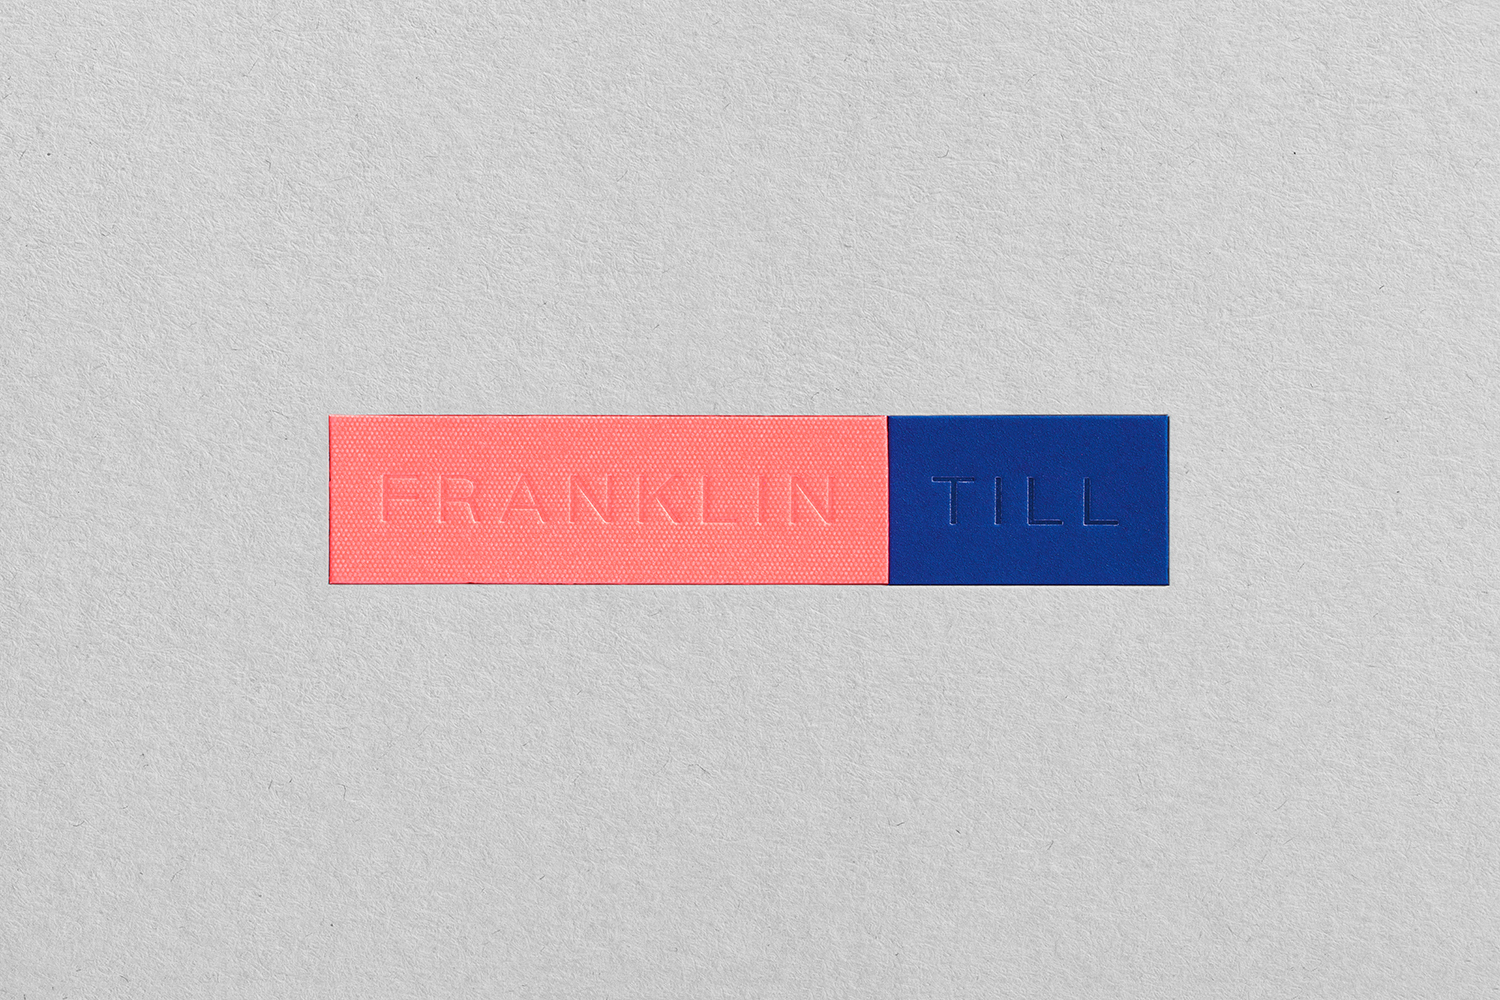 Blind Embossing – FranklinTill by Commission, United Kingdom